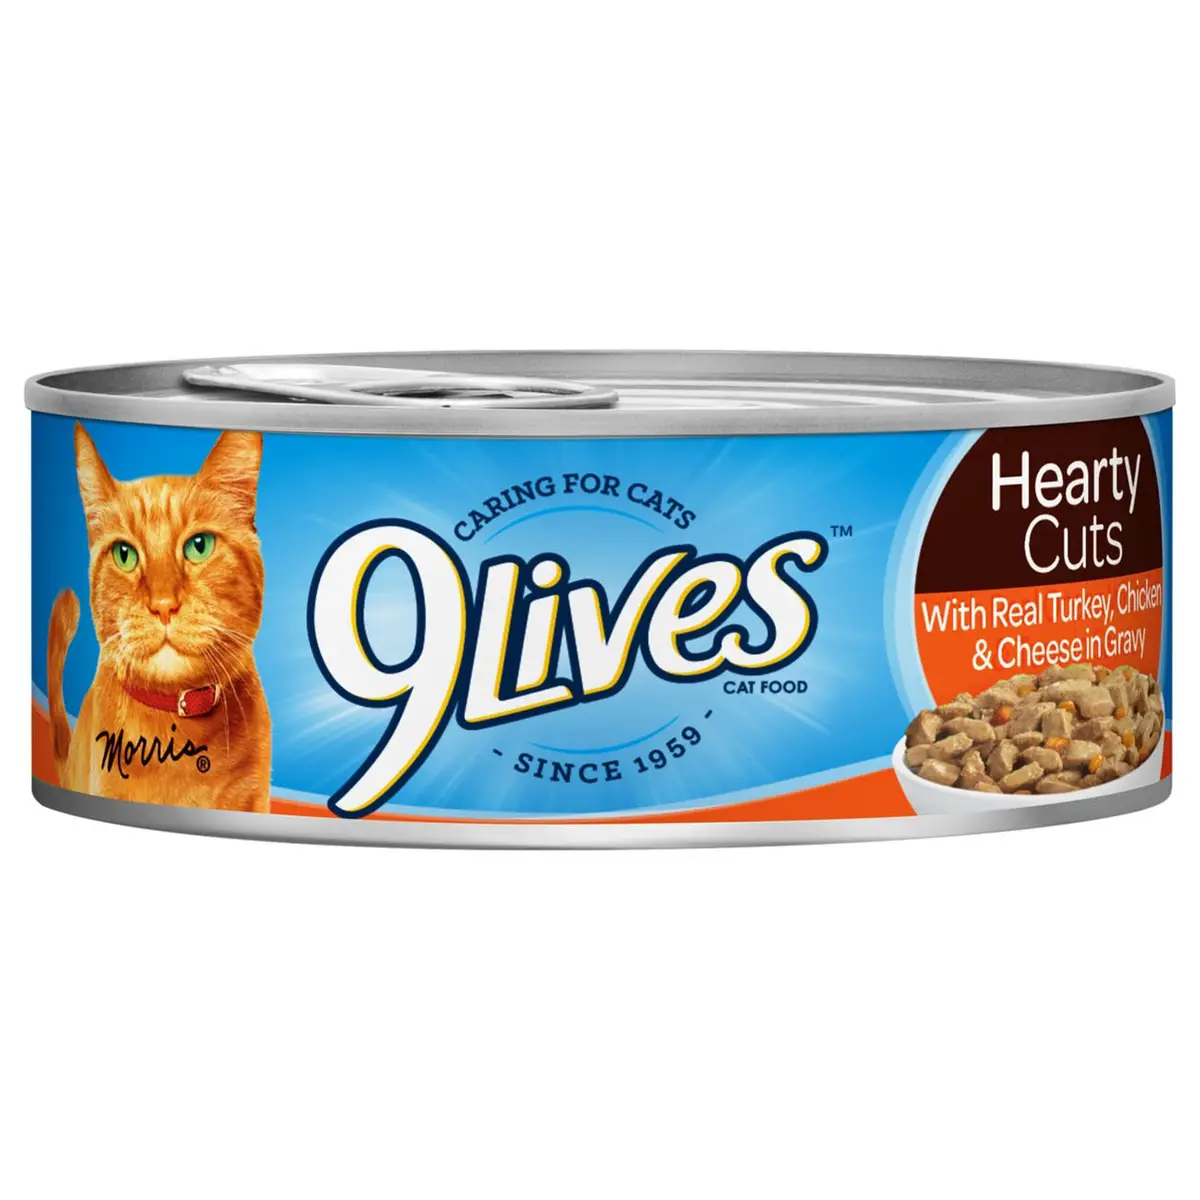 Photo 1 of 24 PK Hearty Cuts with Real Turkey, Chicken & Cheese in Gravy Cat Food BB 2/2/24
